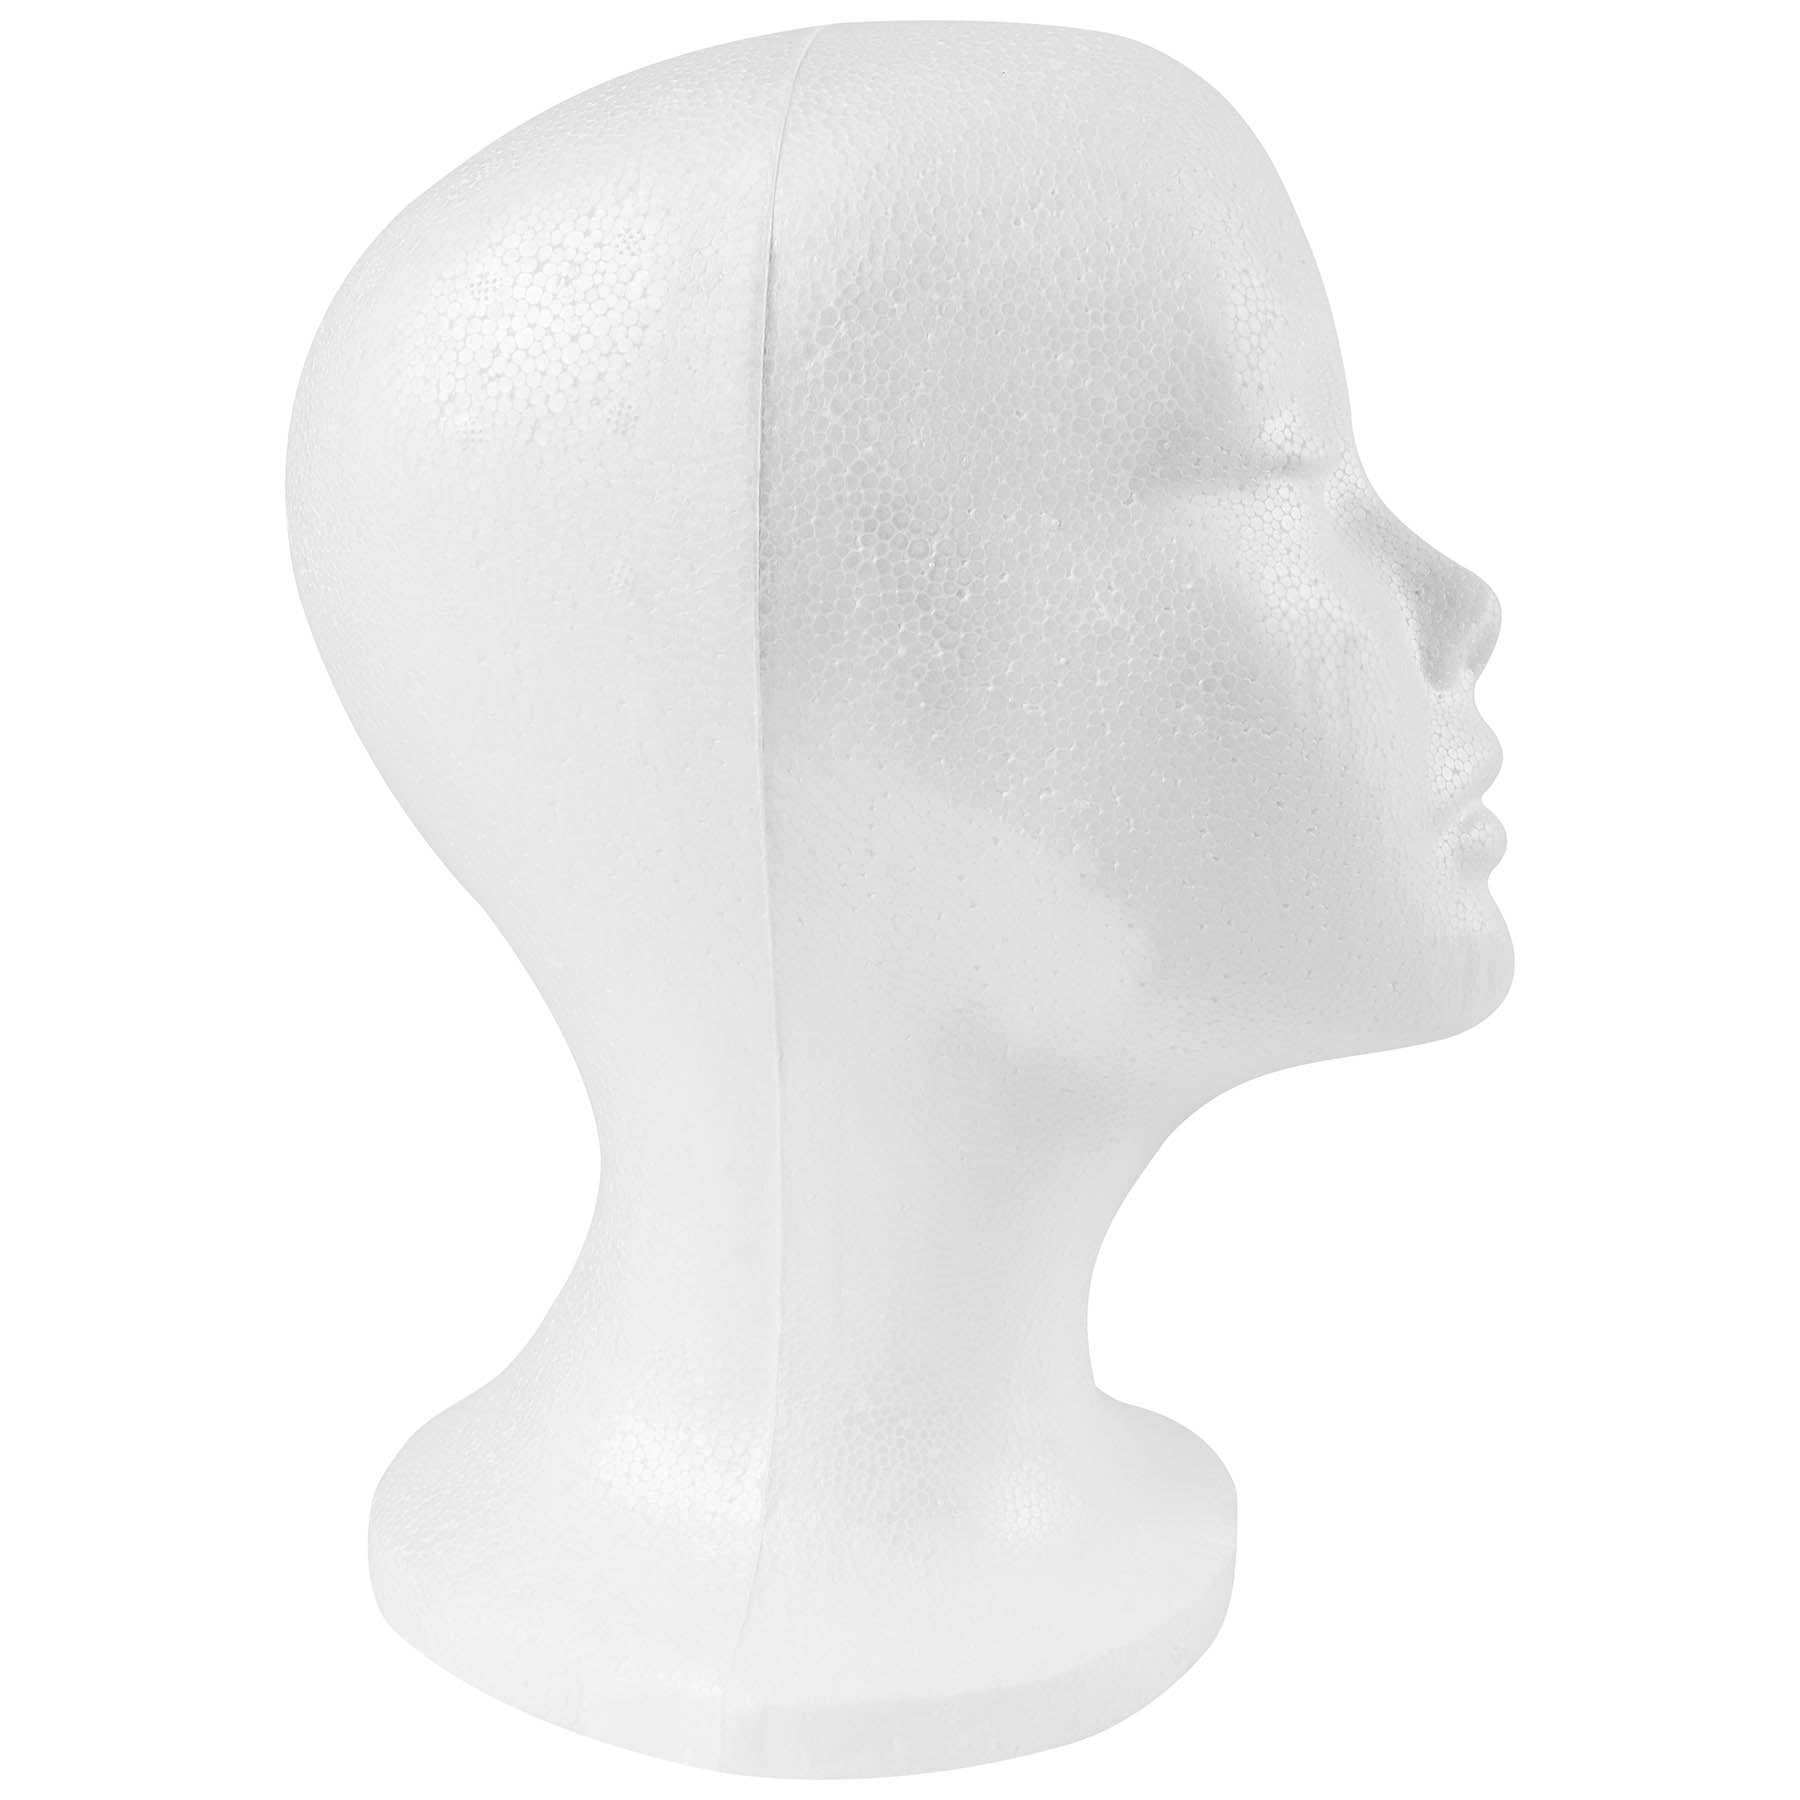  STUDIO LIMITED Styrofoam Mannequin Head, White Foam Wig Head  Display with Wig Cap 2pcs (6 PACK) : Beauty & Personal Care